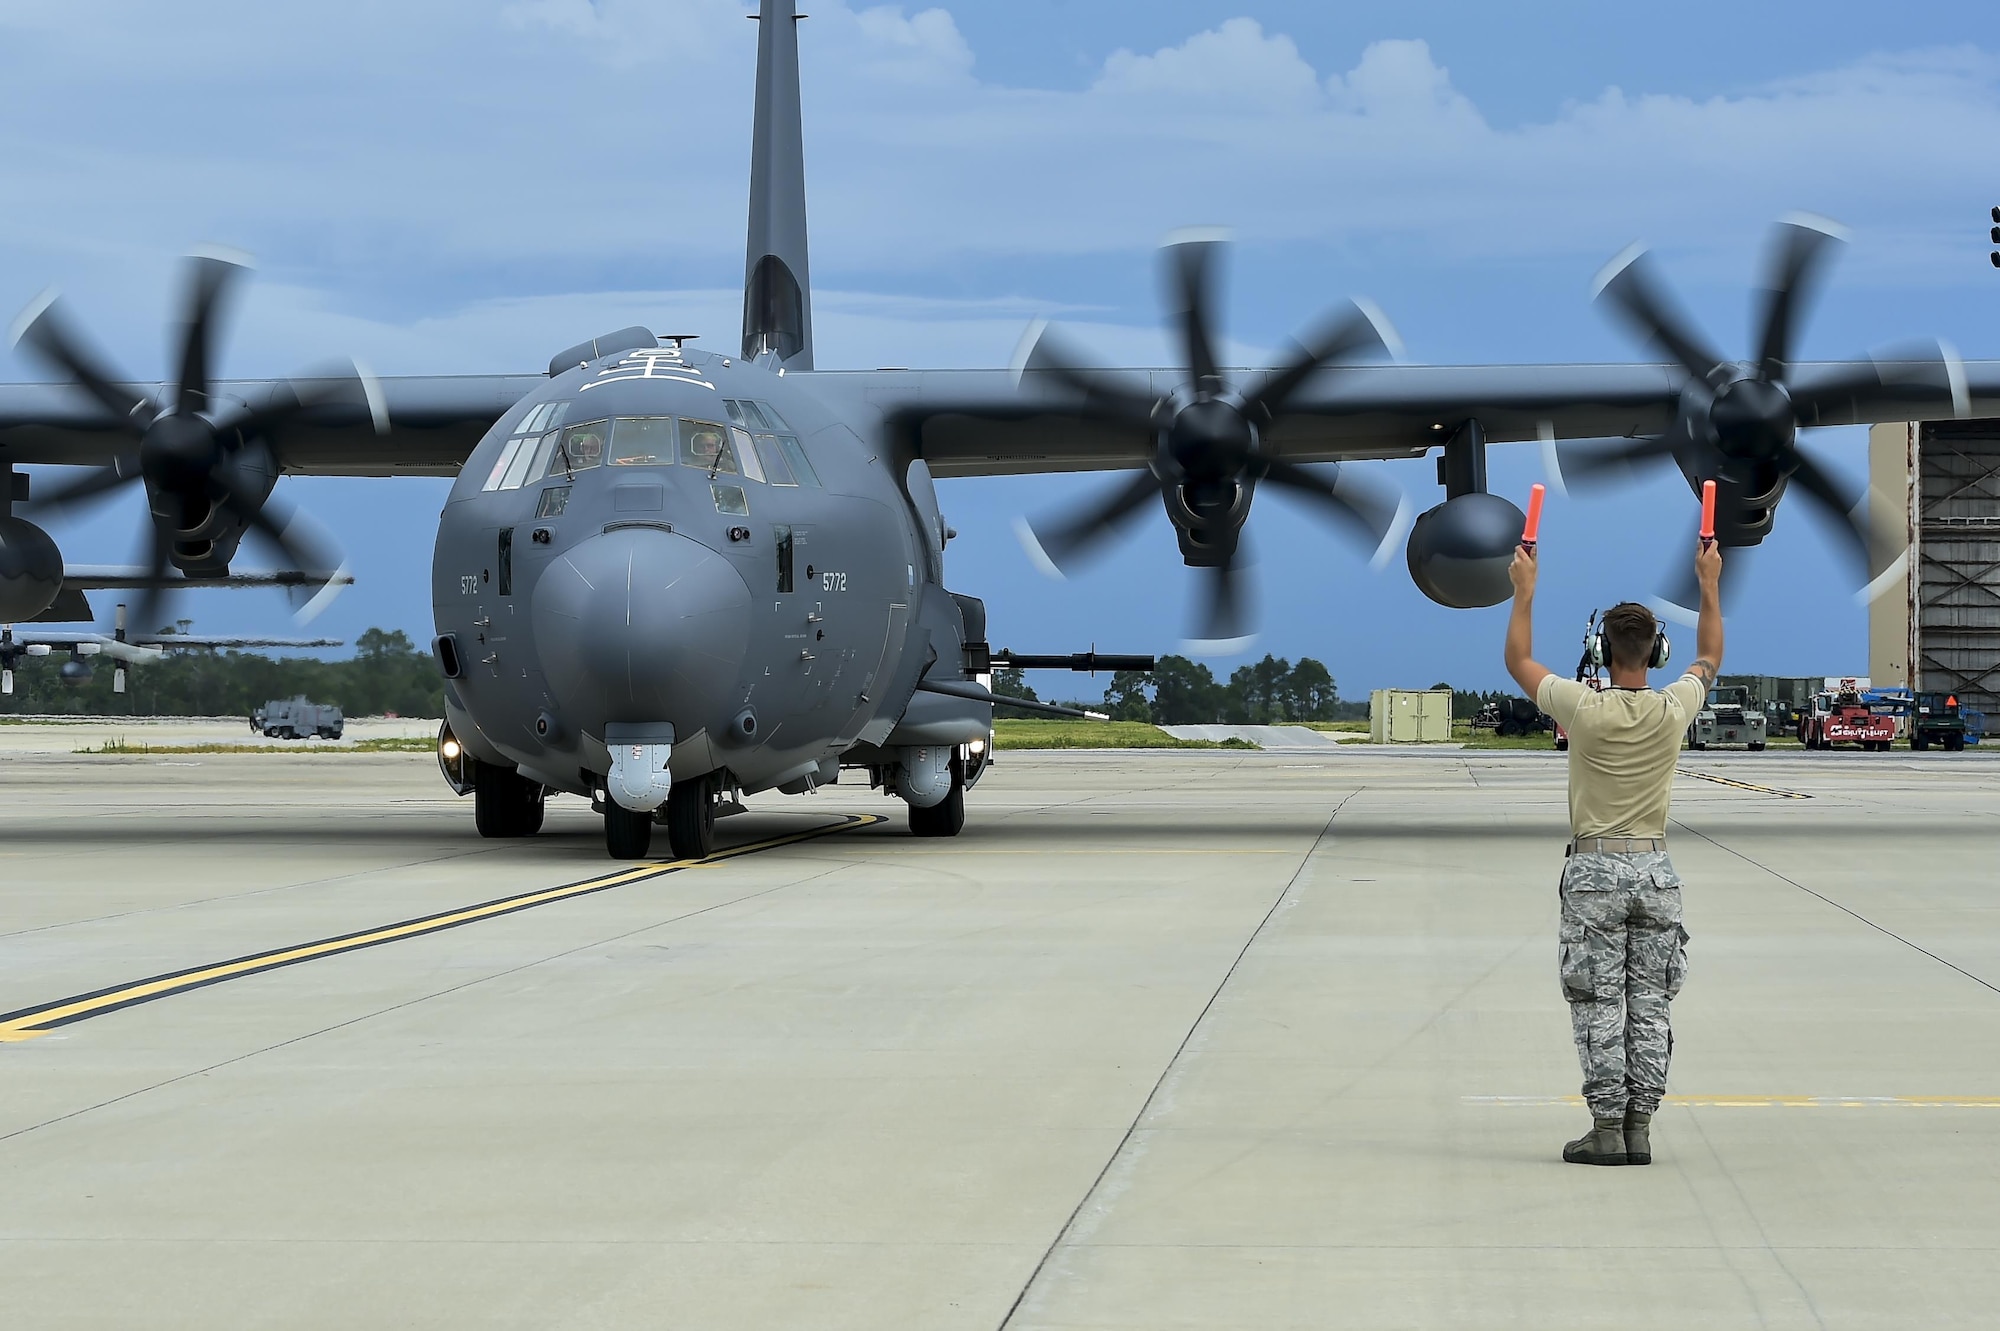 A newly arrived AC-130J Ghostrider gunship, Block 20 model, is marshaled into a parking spot at Hurlburt Field, Fla., July 18, 2016. The AC-130J is the fourth generation gunship replacing the aging fleet of AC-130U/W gunships. Over the past four decades, AC-130s have deployed constantly to hotspots throughout the world in support of special operations and conventional forces. (U.S. Air Force by Senior Airman Jeff Parkinson)